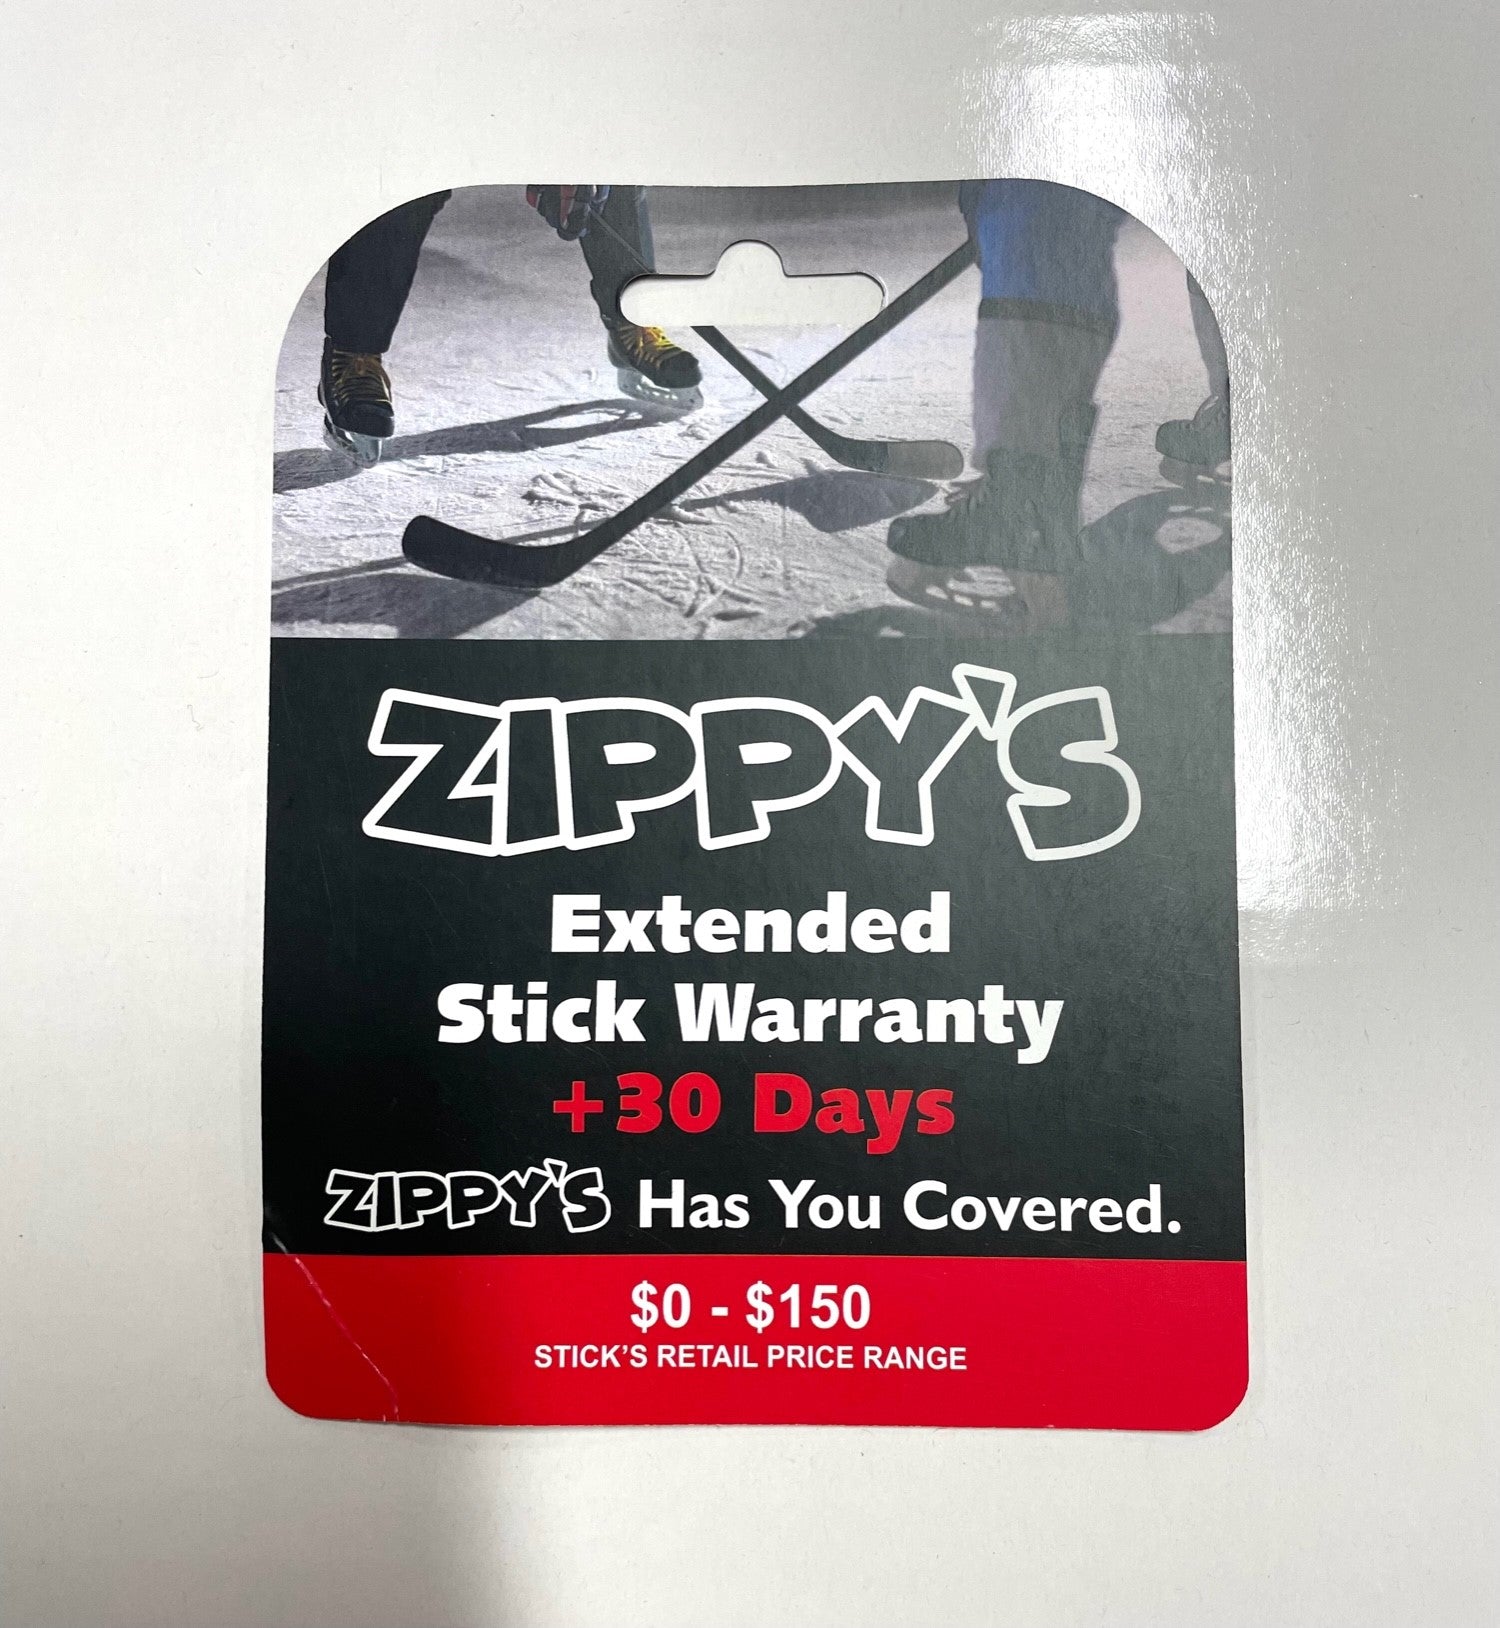 Zippy'S $0 - $150 Plus 30 Days Extended Warranty Stick $0 To 150.00 Must Have Manufactures Warranty-Zippy-Sports Replay - Sports Excellence